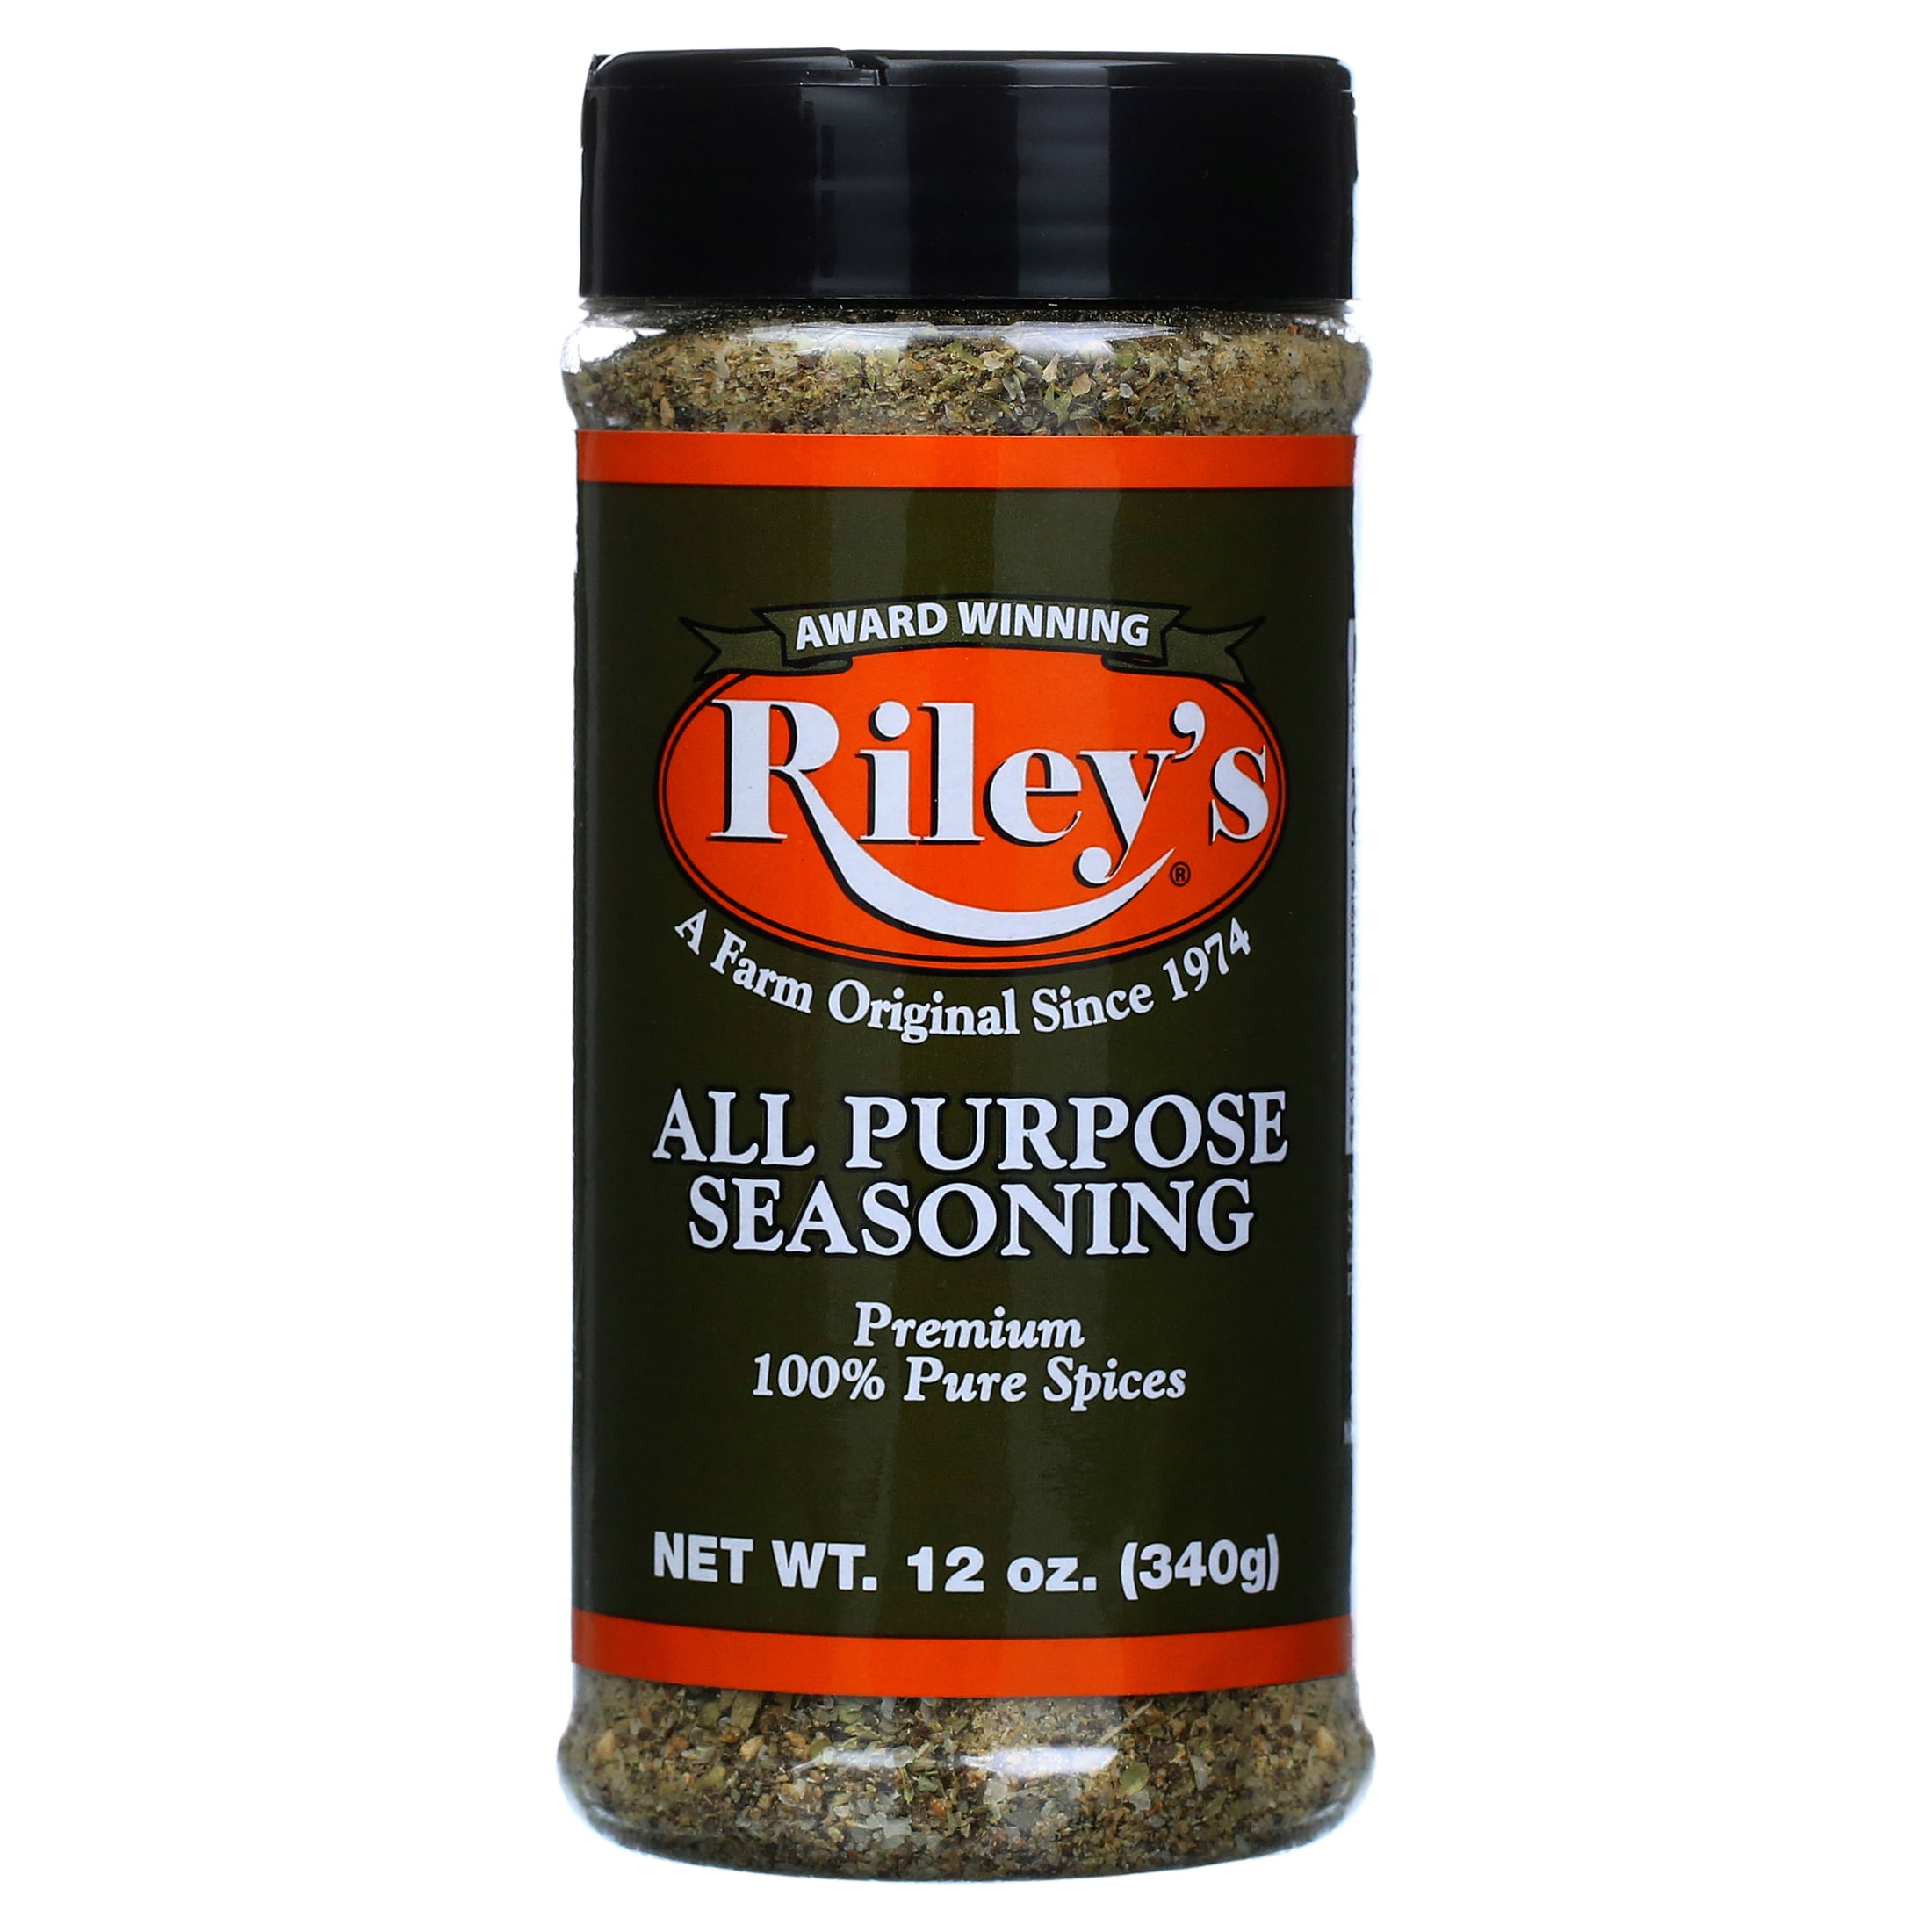 Trick Daddy - My 6 Oz Sunday's Soul seasoning is back in